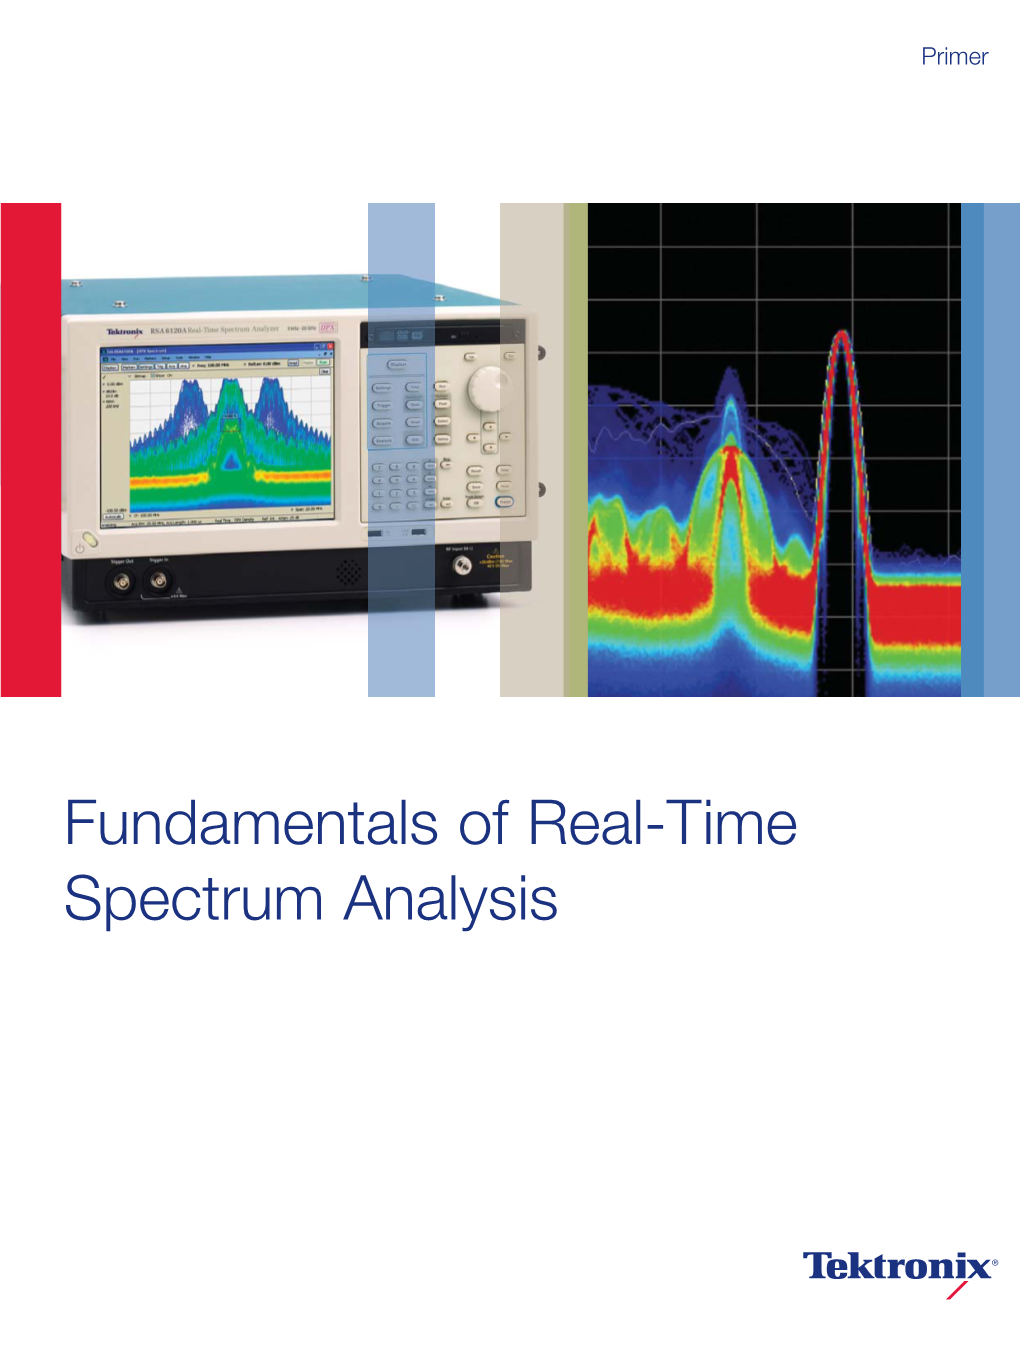 Fundamentals of Real-Time Spectrum Analysis Fundamentals of Real-Time Spectrum Analysis Primer